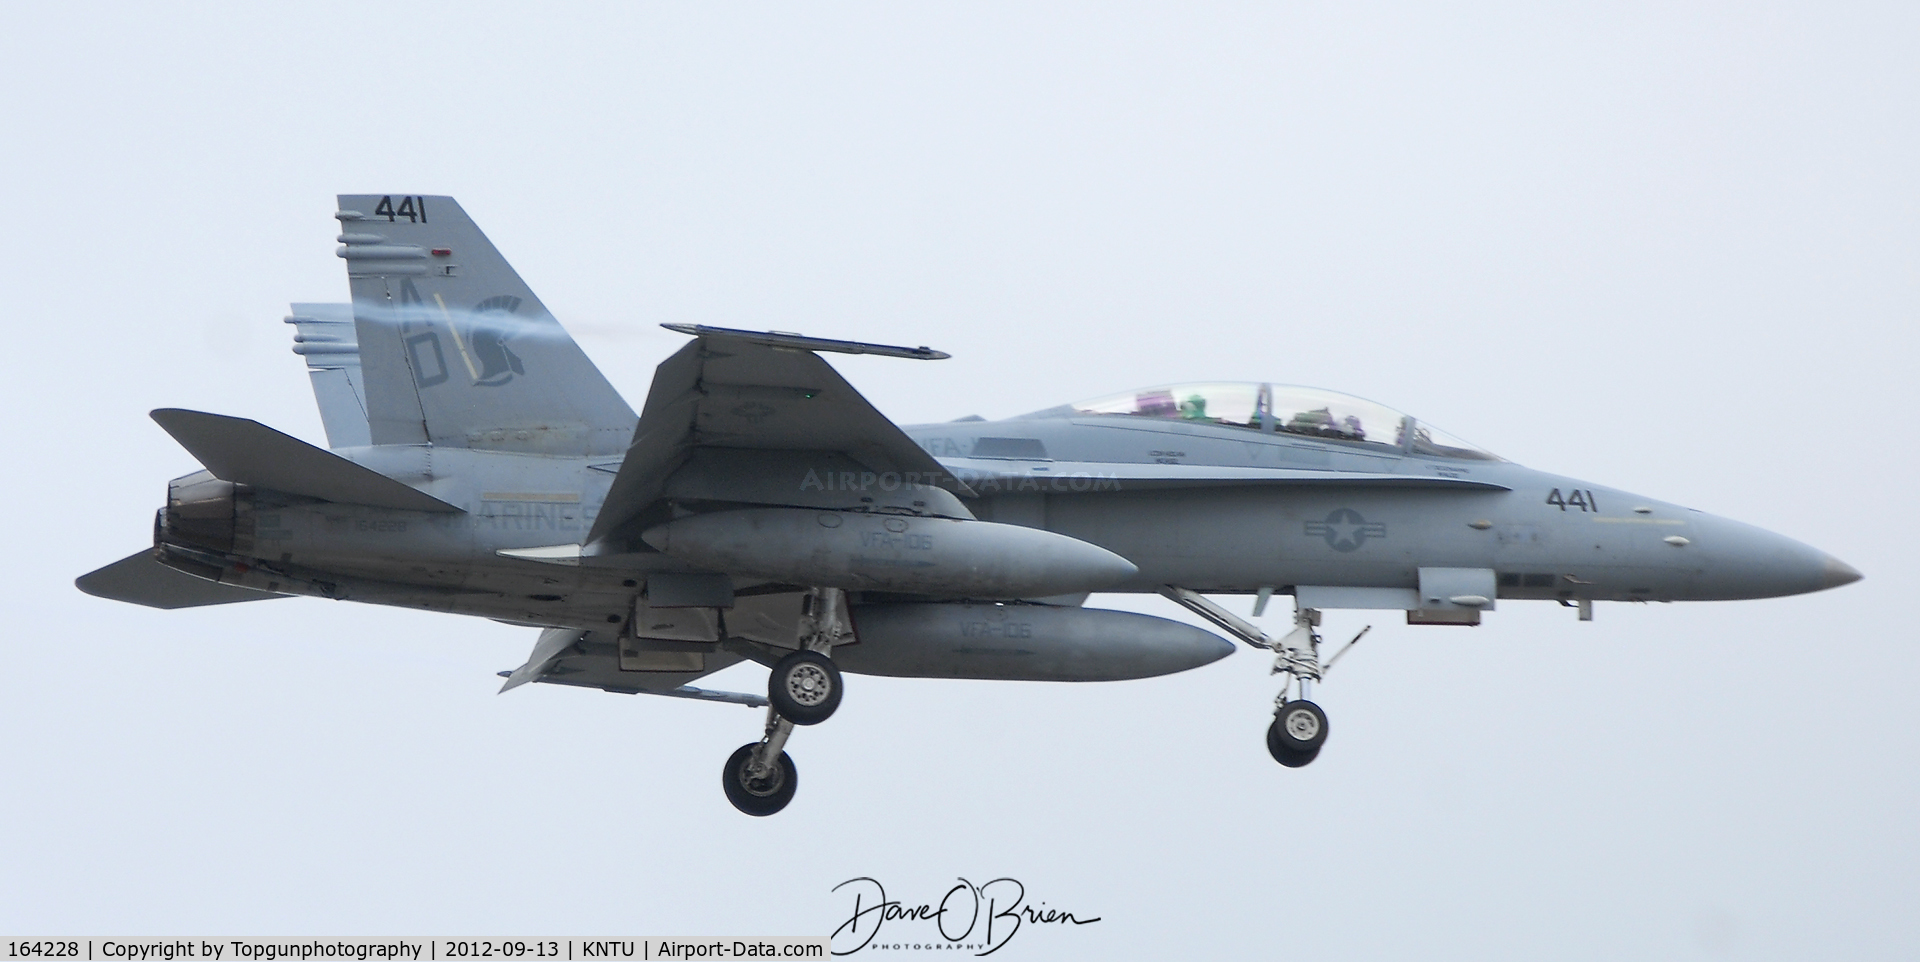 164228, 1991 McDonnell Douglas F/A-18D Hornet C/N 991/D070, Pilot in training working the pattern at NAS Oceana